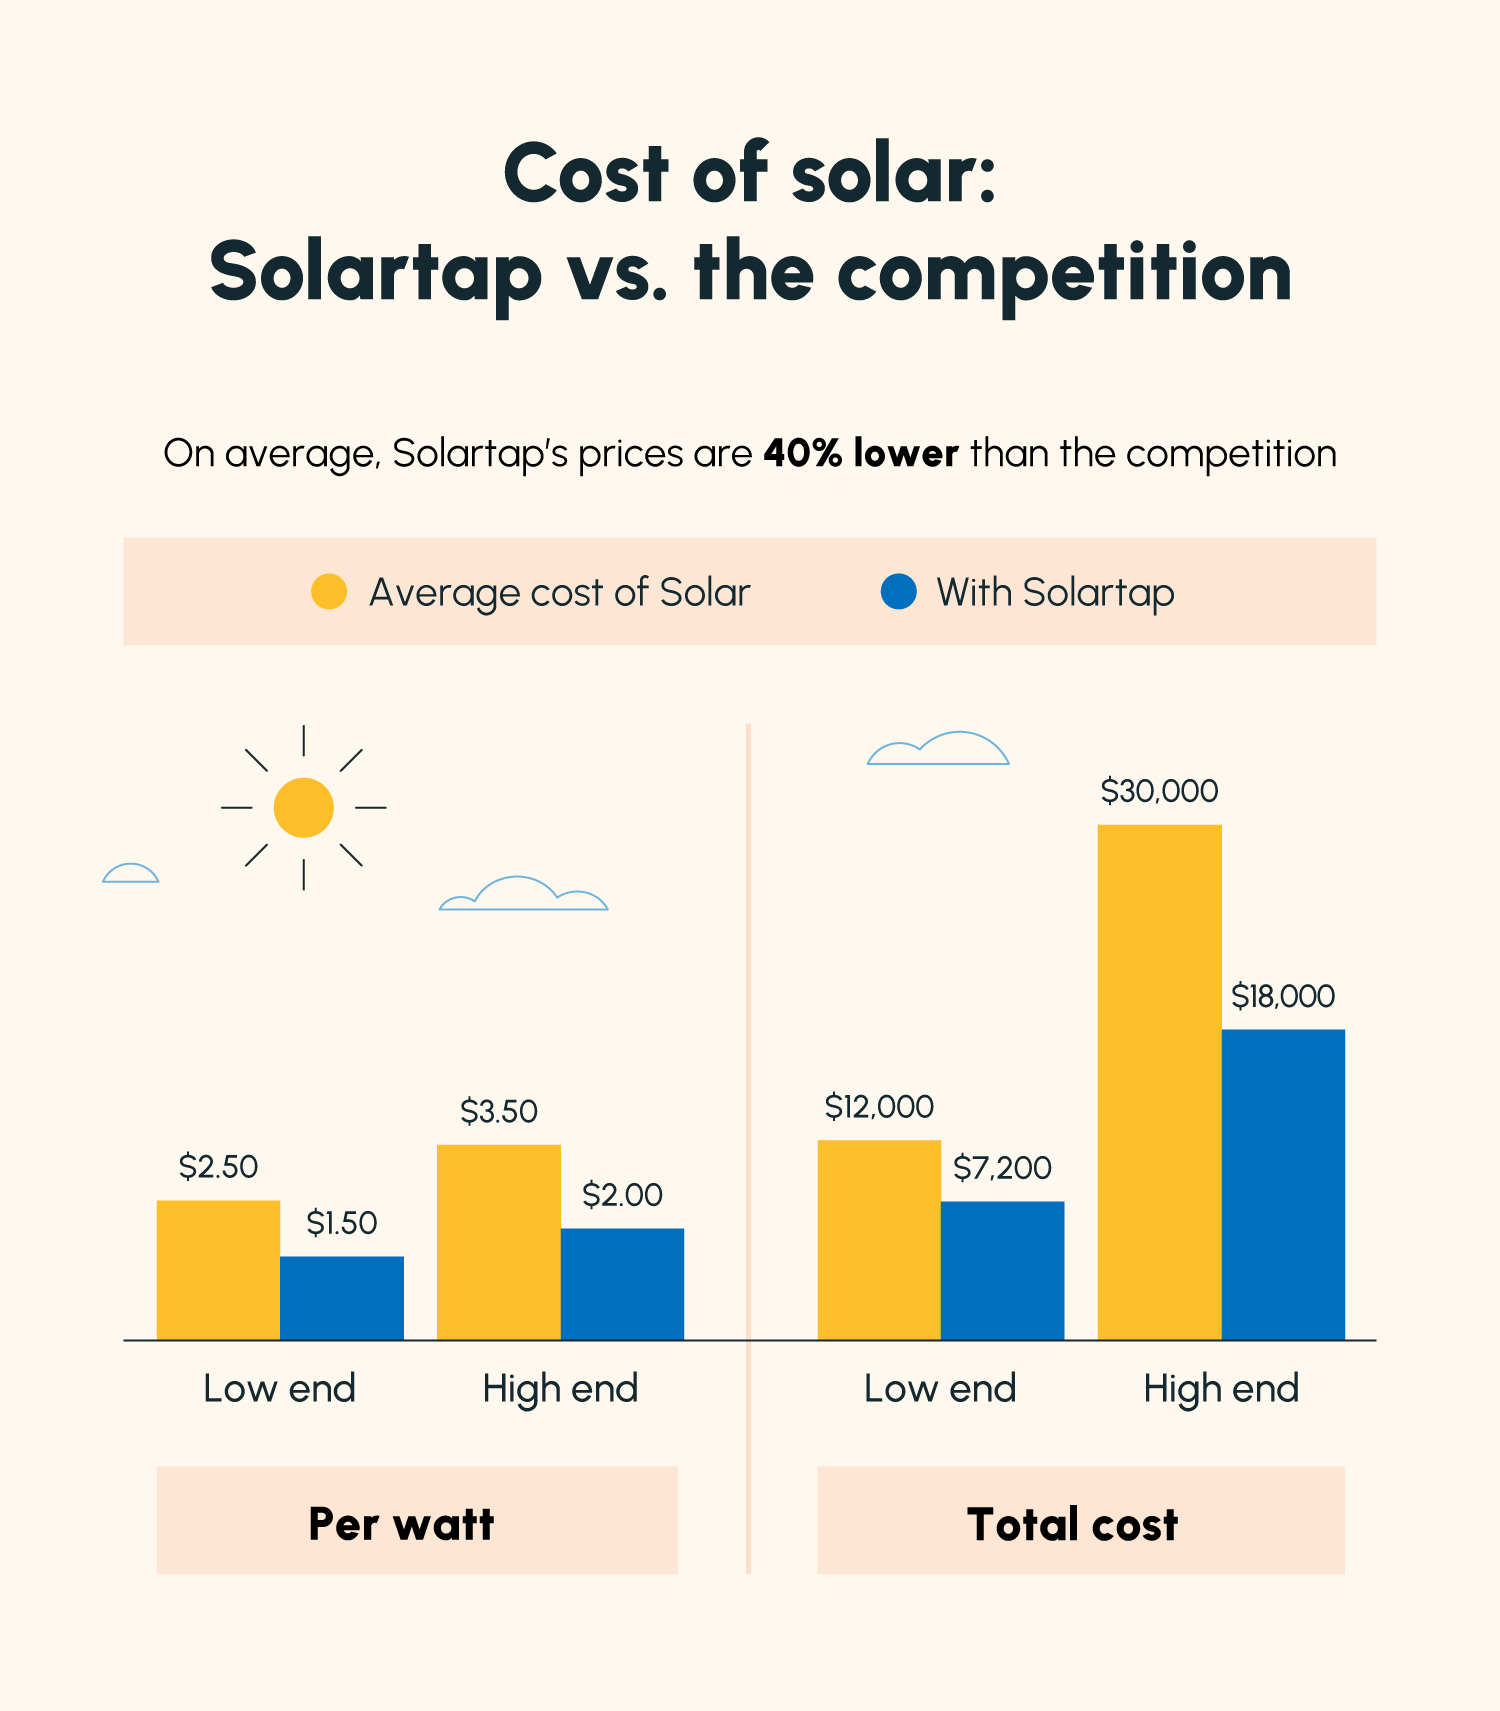 A comparison of the cost of a solar panel installation with Solartap vs. with the competition